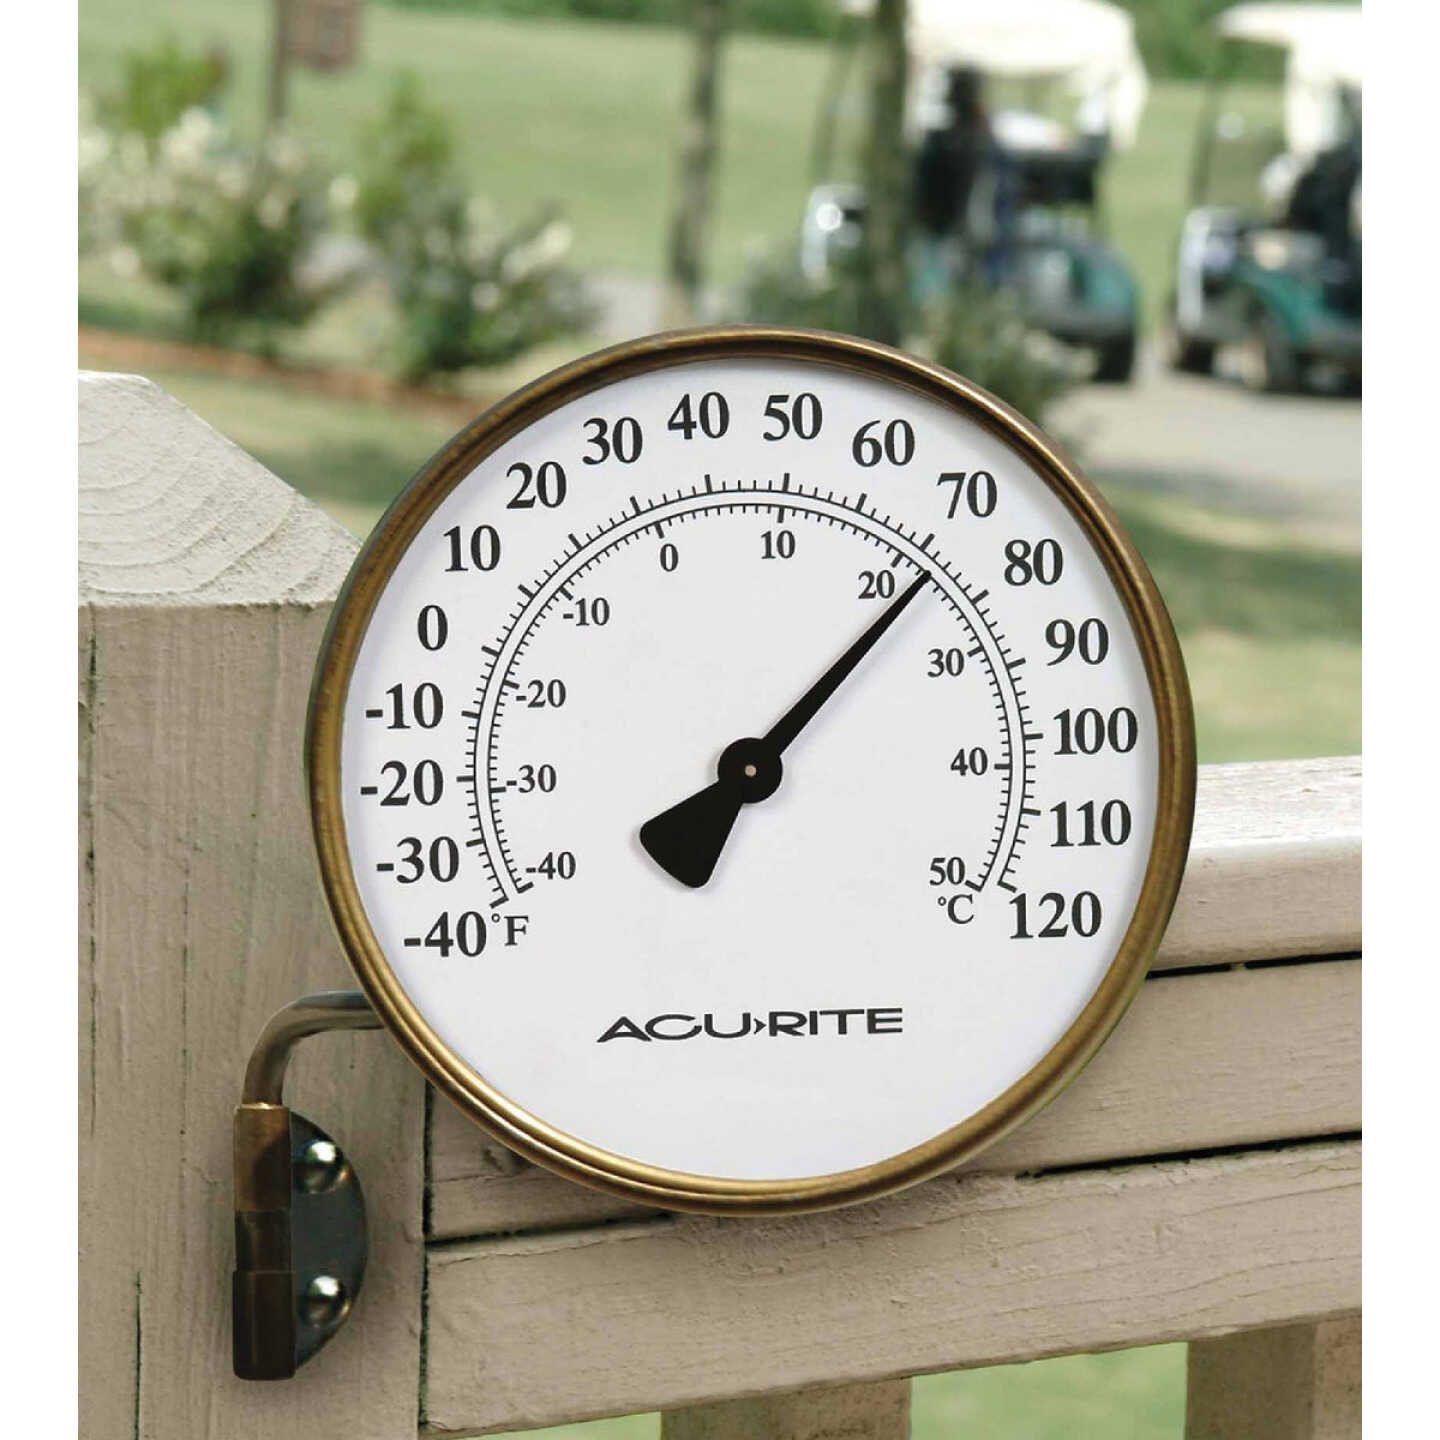 Acurite 00888A3 Indoor Outdoor Digital Thermometer